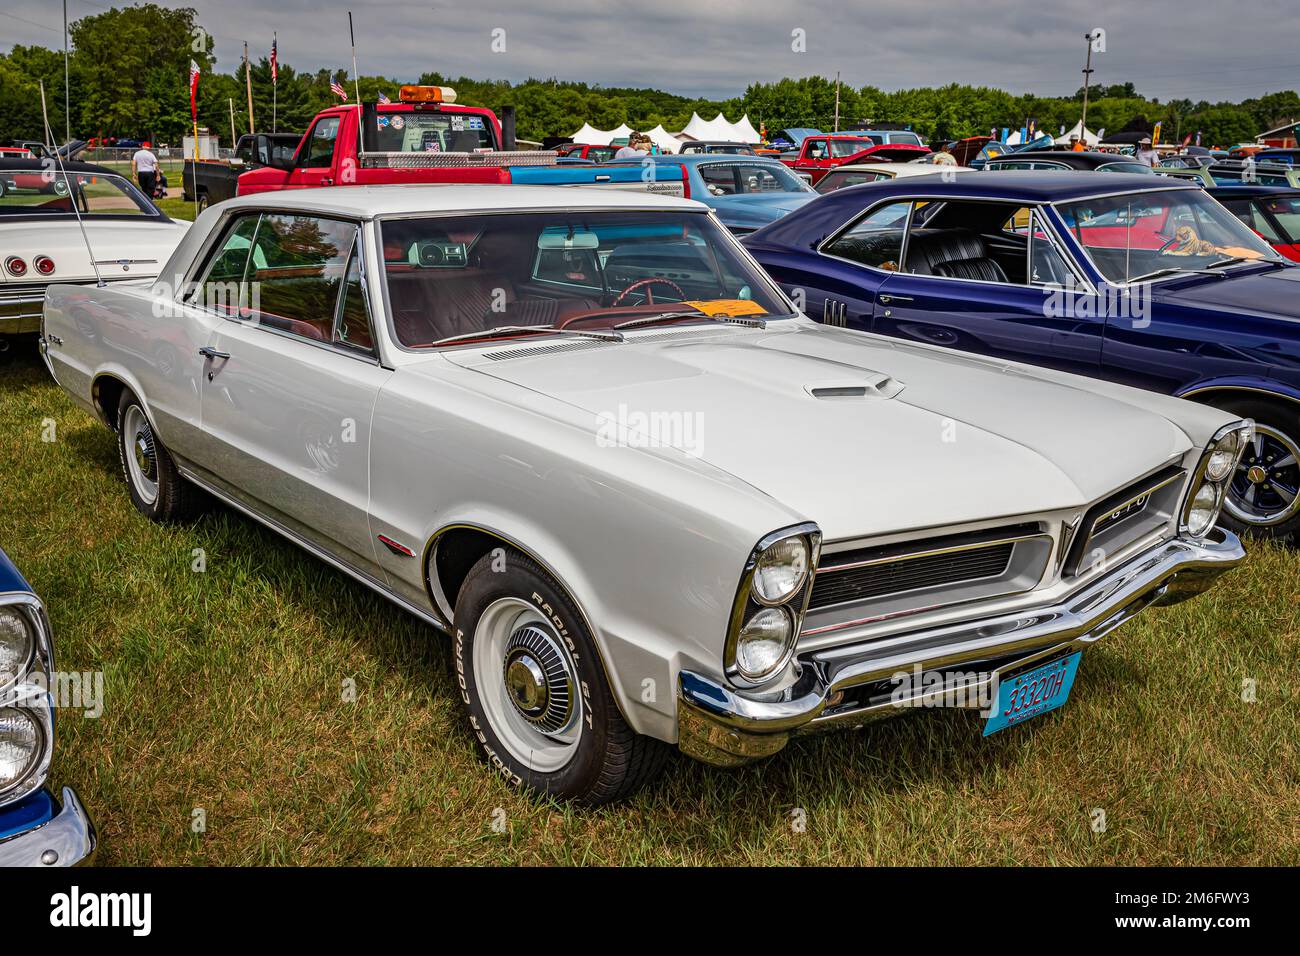 Iola, WI - July 07, 2022: High perspective front corner view of a 1965 Pontiac GTO 2 Door Hardtop at a local car show. Stock Photo